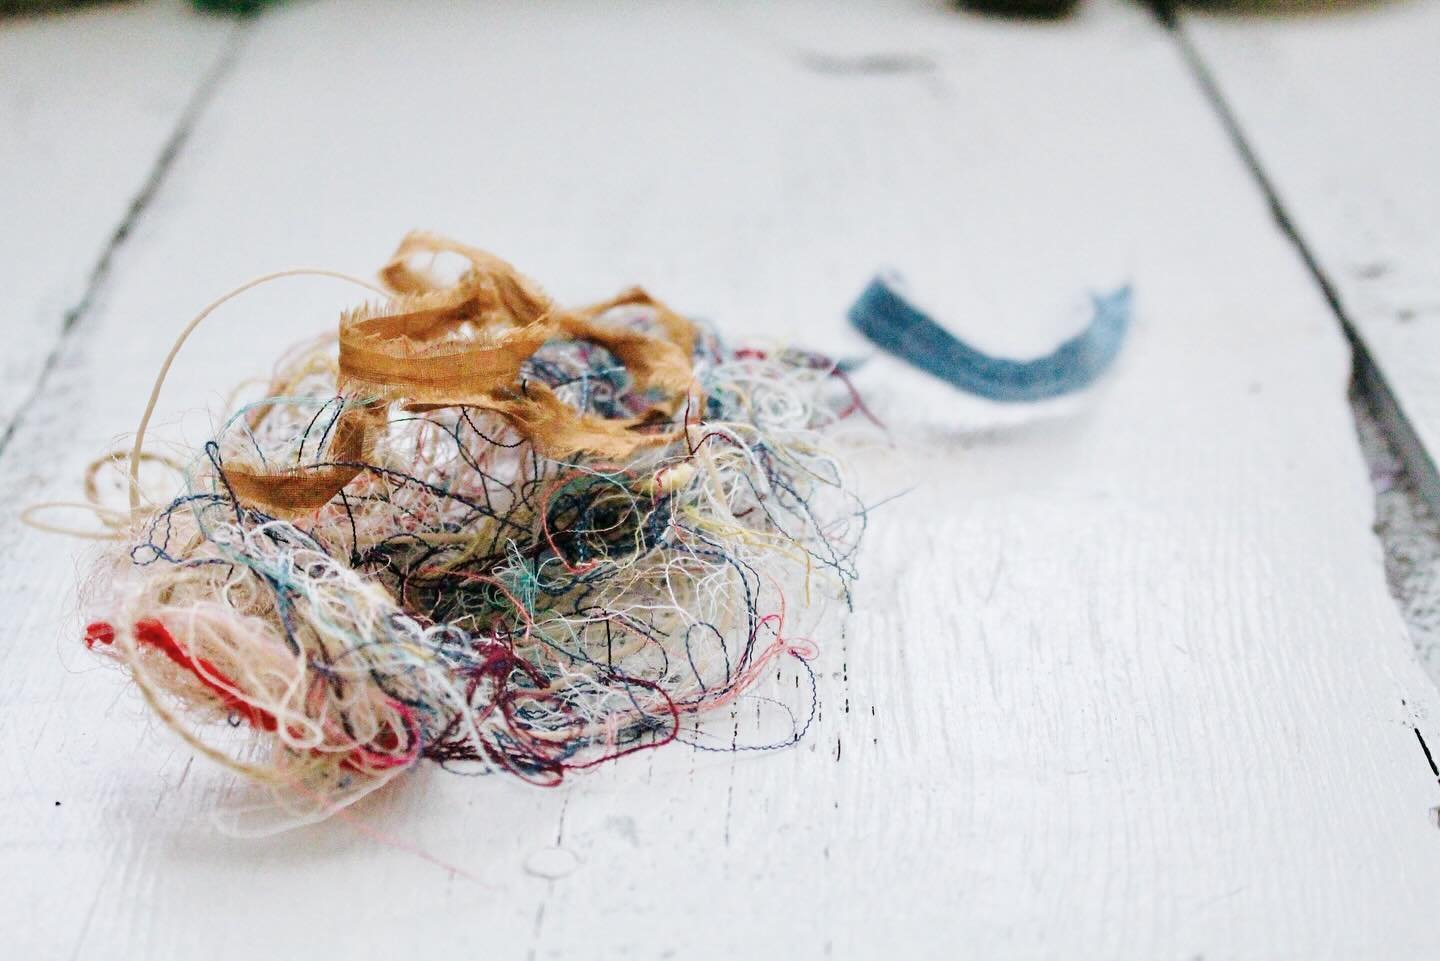 &bull;
Once all the Mending Space kits have been assembled, packaged, and shipped to the four corners, one of my favorite things to do is gather the stray threads I pulled into a loose pile. In this tangle of tattered textile strands, I find an assem